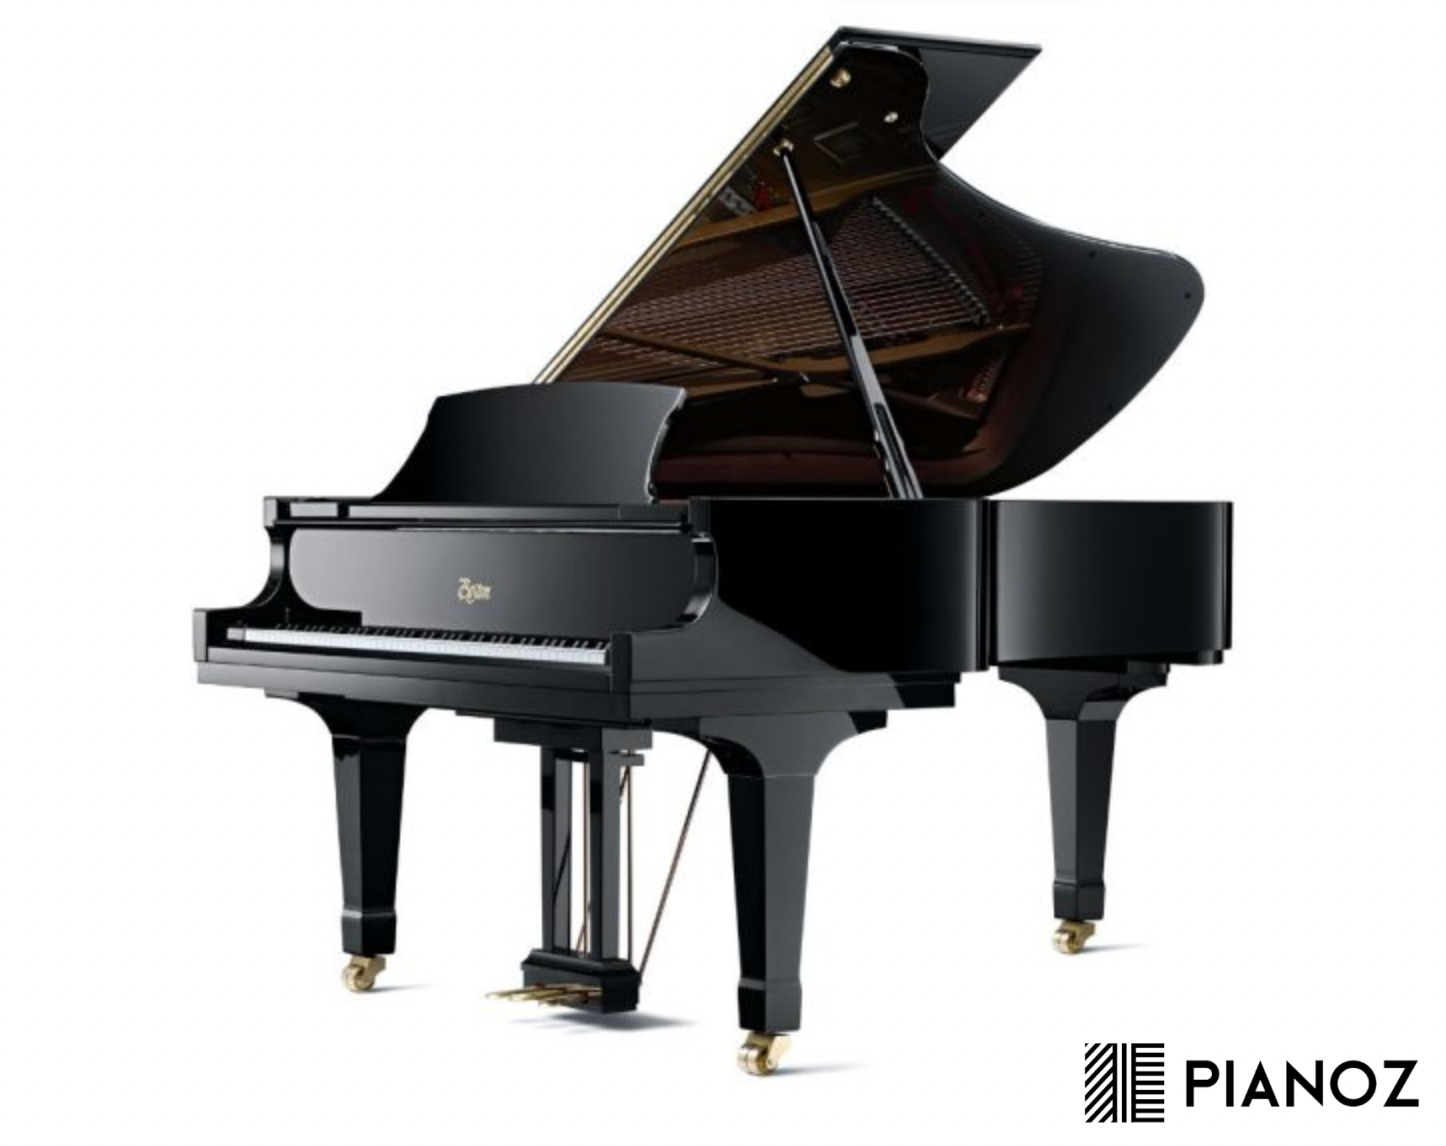 Steinway Boston 215 Performance Edition Grand Piano piano for sale in UK